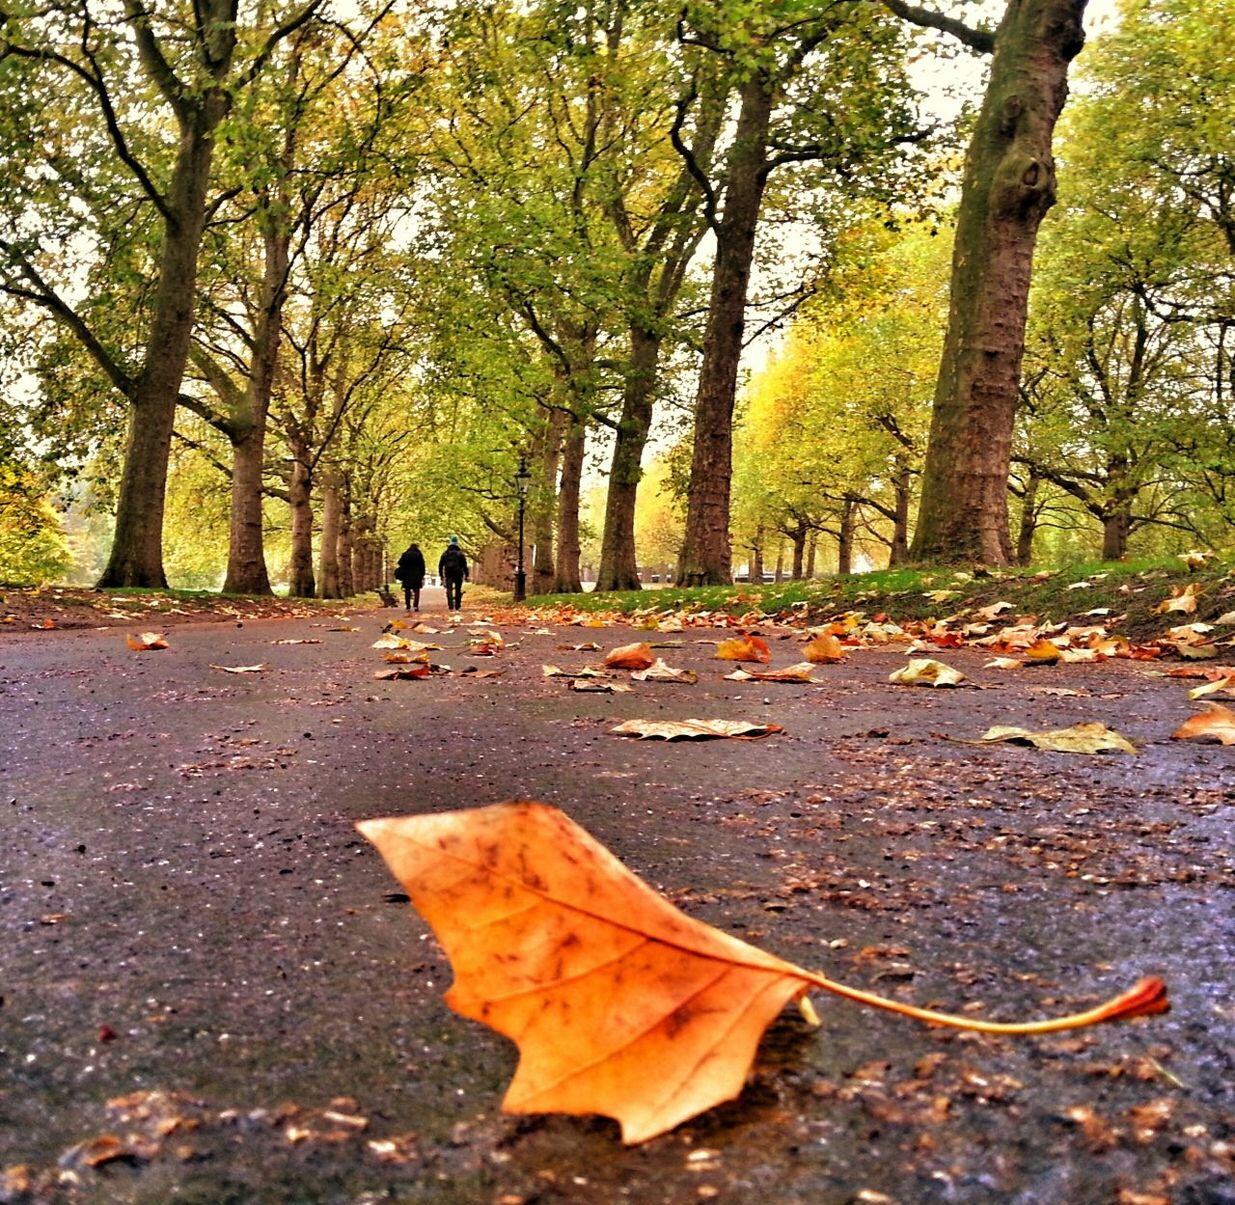 Close-up of autumn leaves with people walking in background